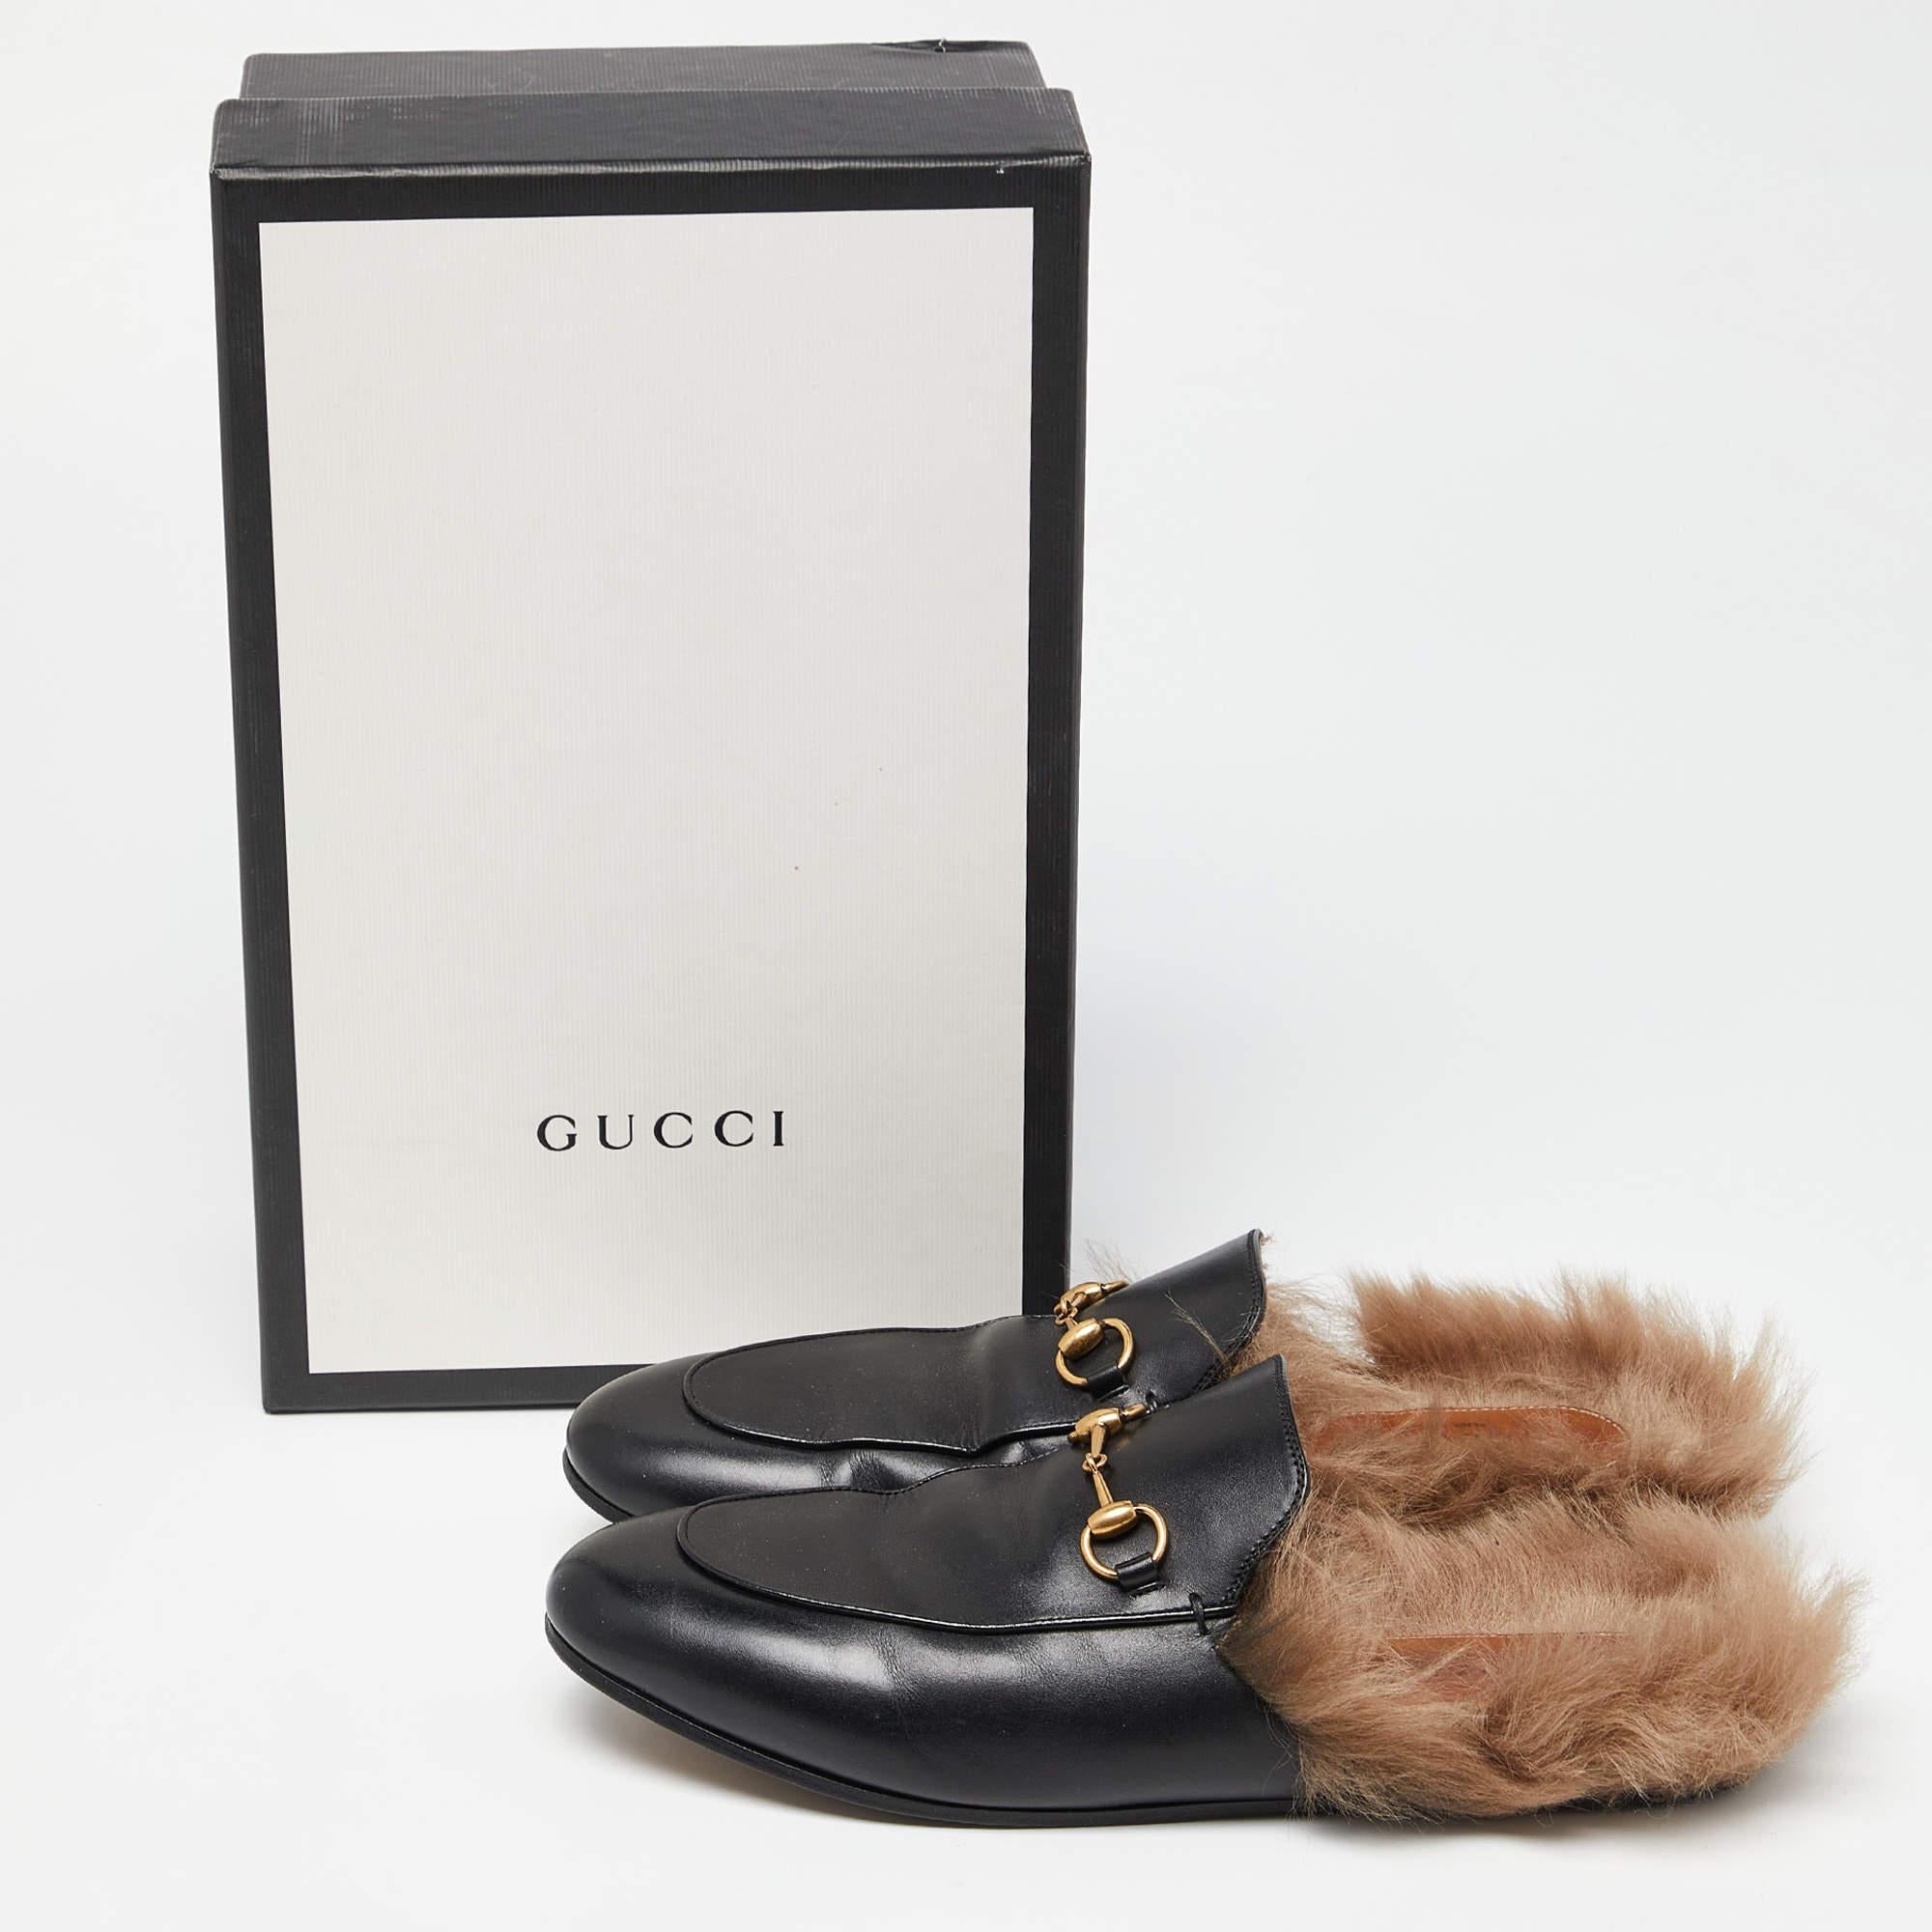 Gucci Black Leather and Fur Princetown Flat Mules Size 41 5